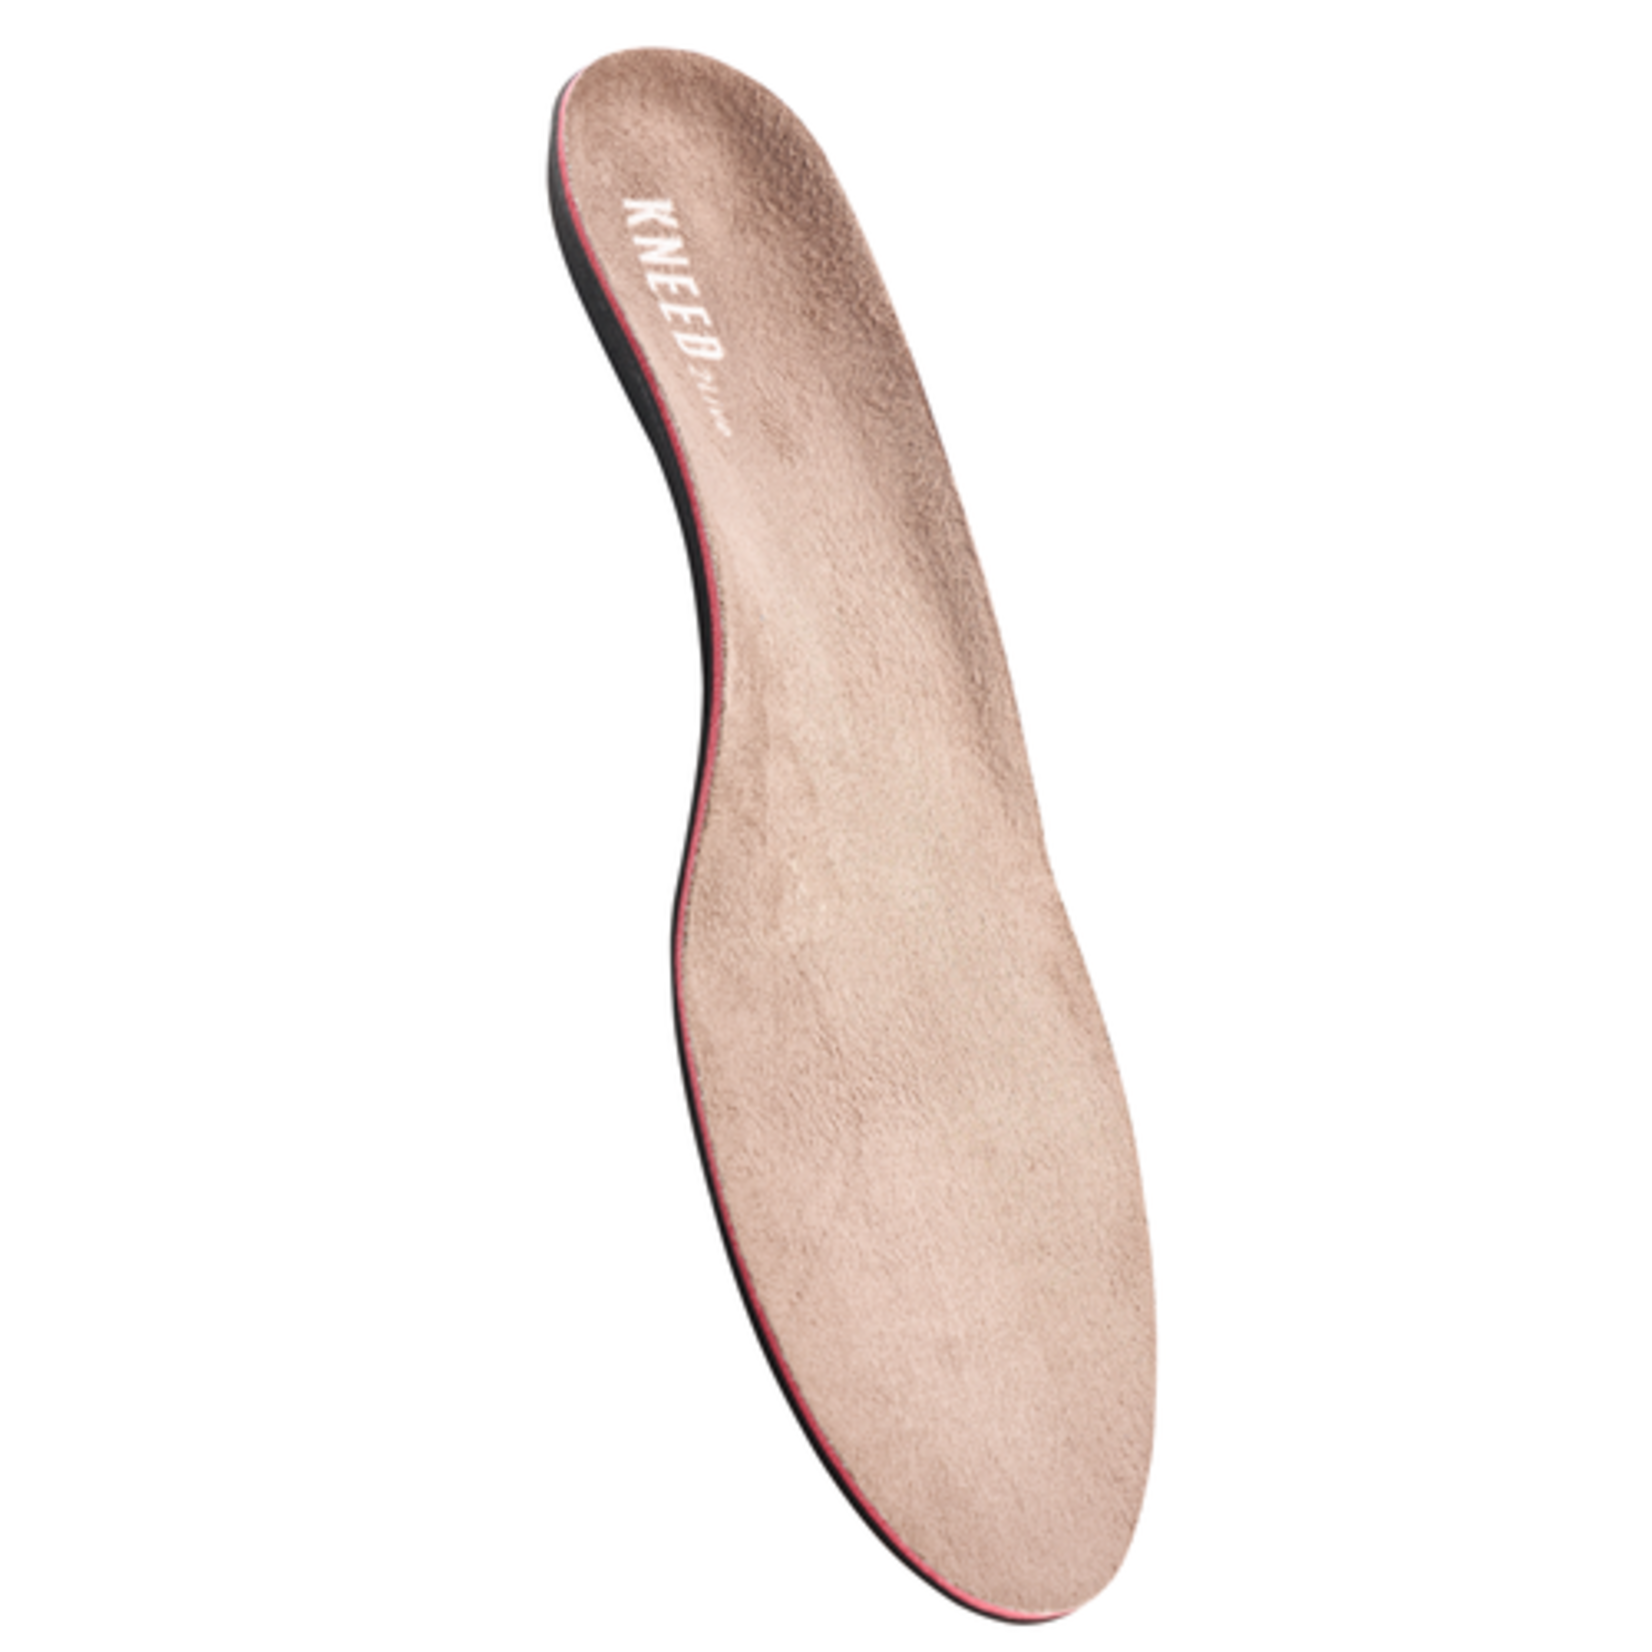 Kneed 2Live Insoles